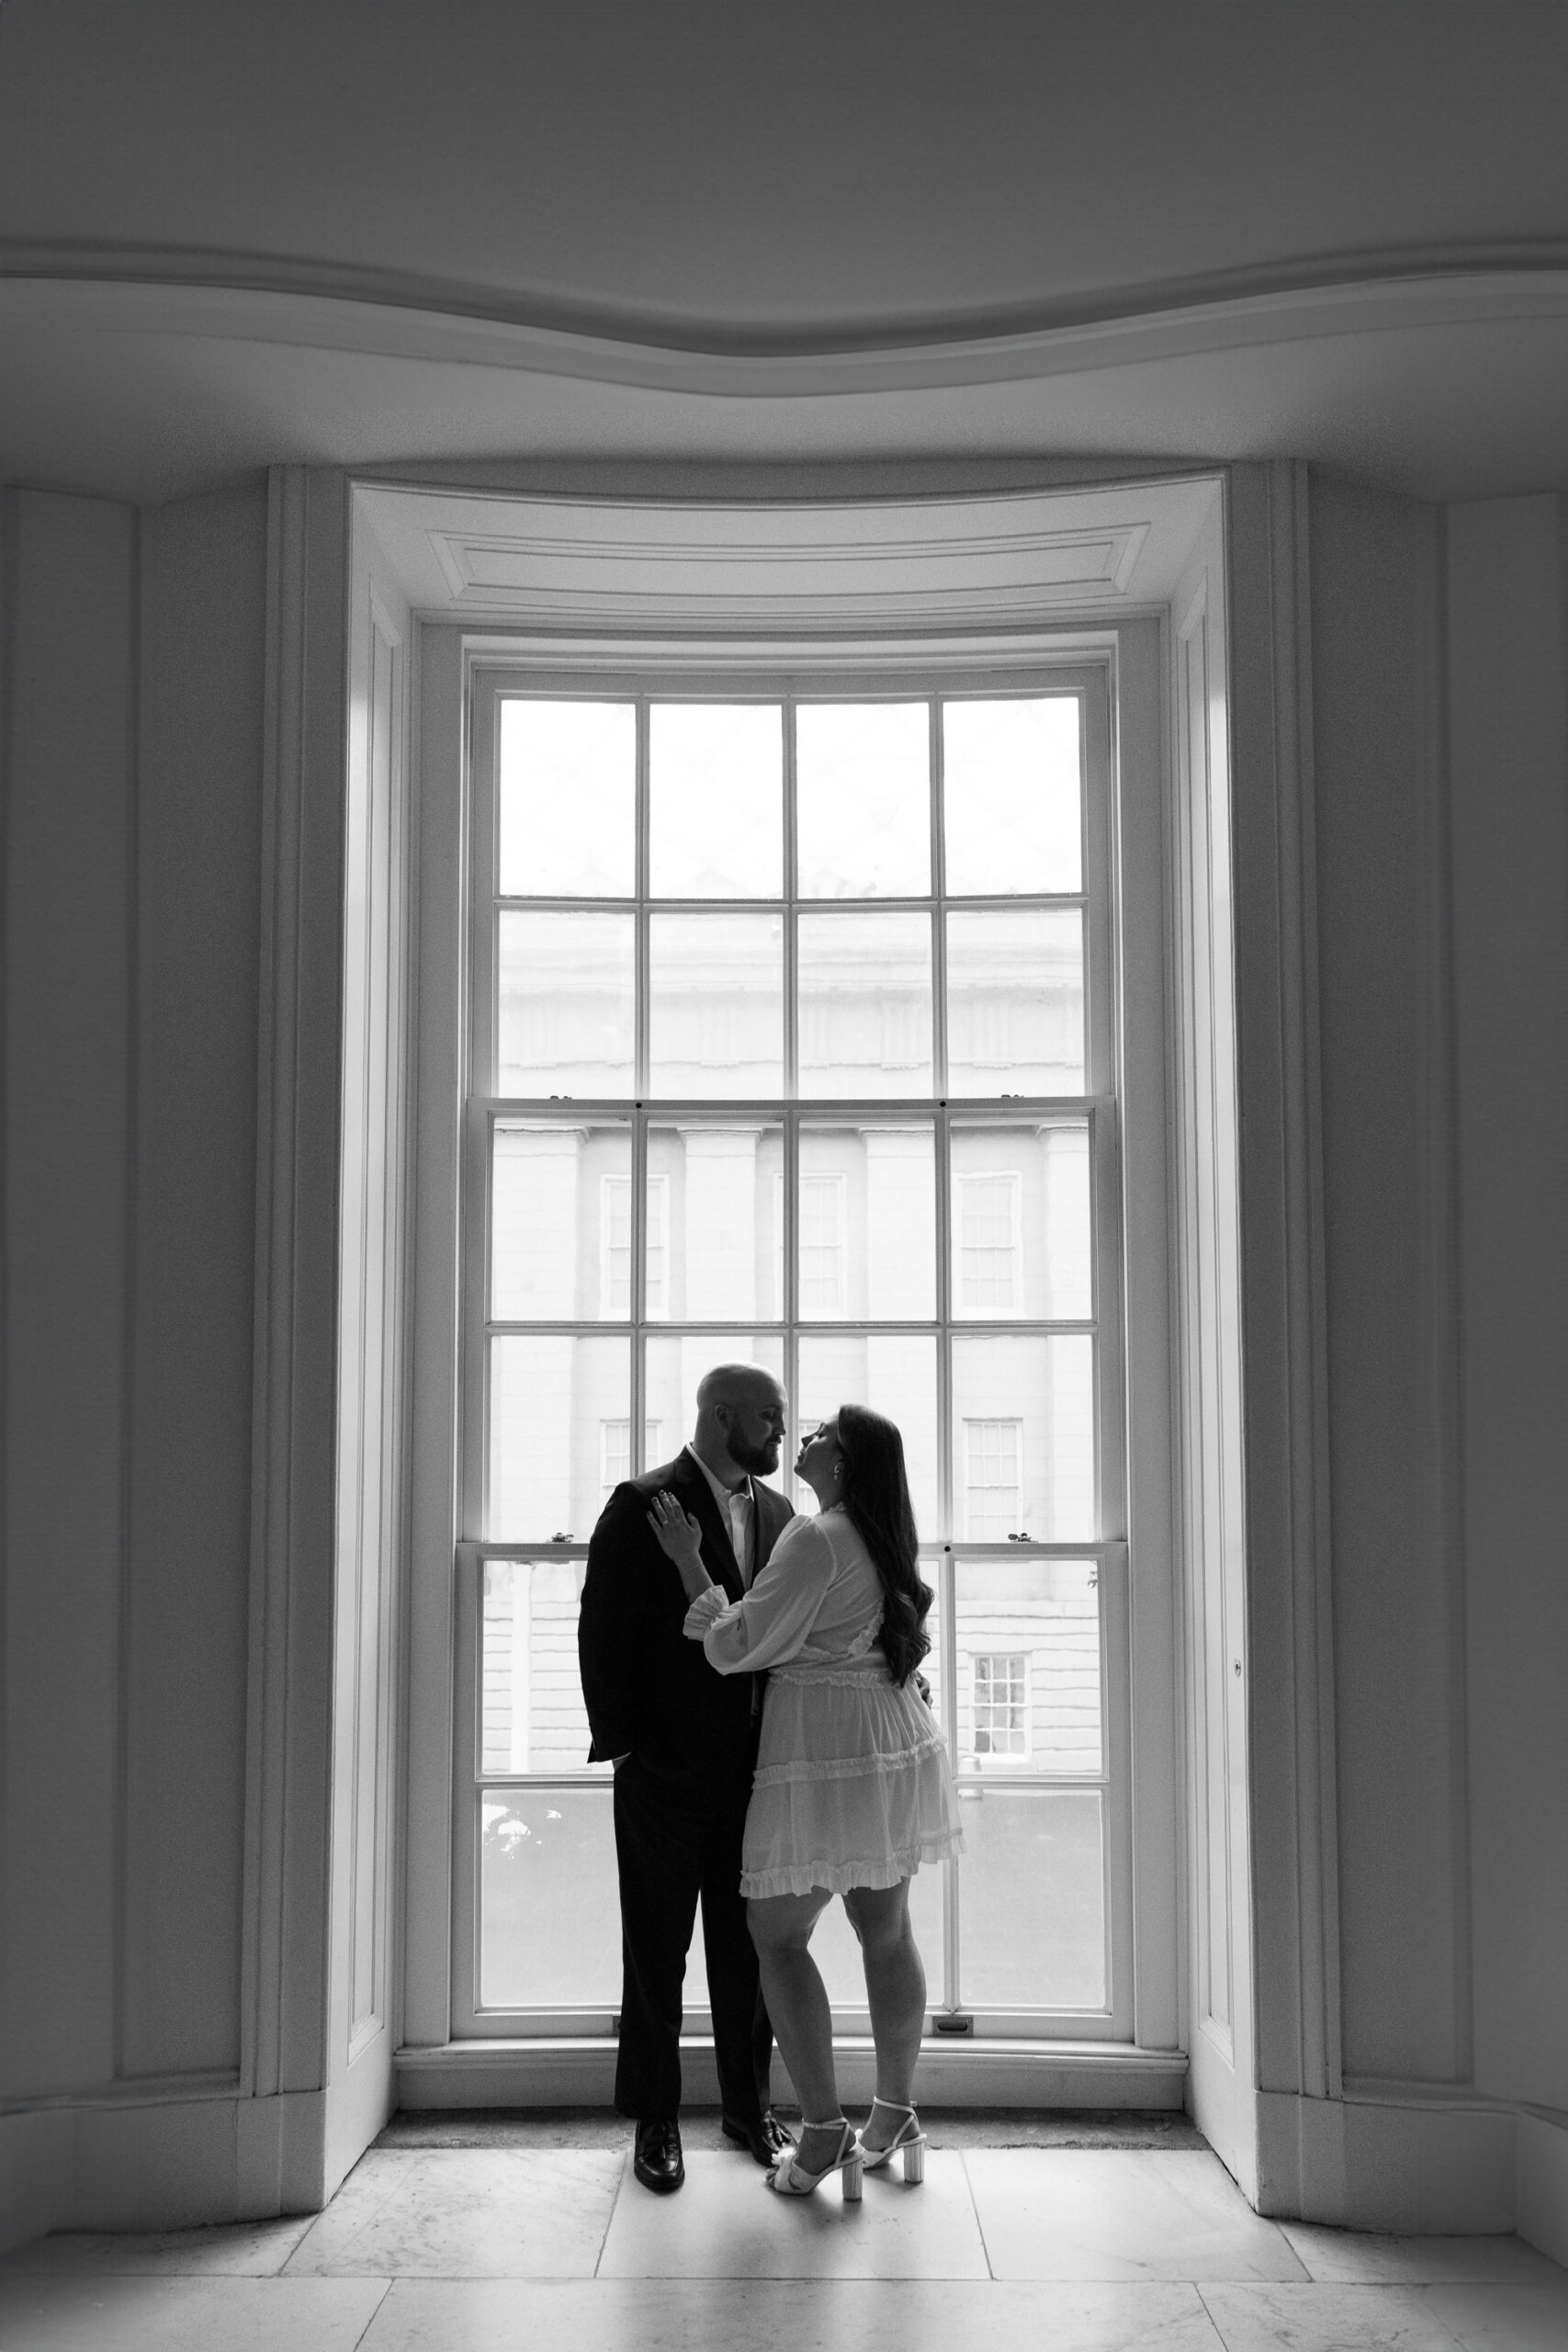 A couple embraces for their engagement photos at the National Portrait Gallery in Washington DC. They are standing in front of a large window.